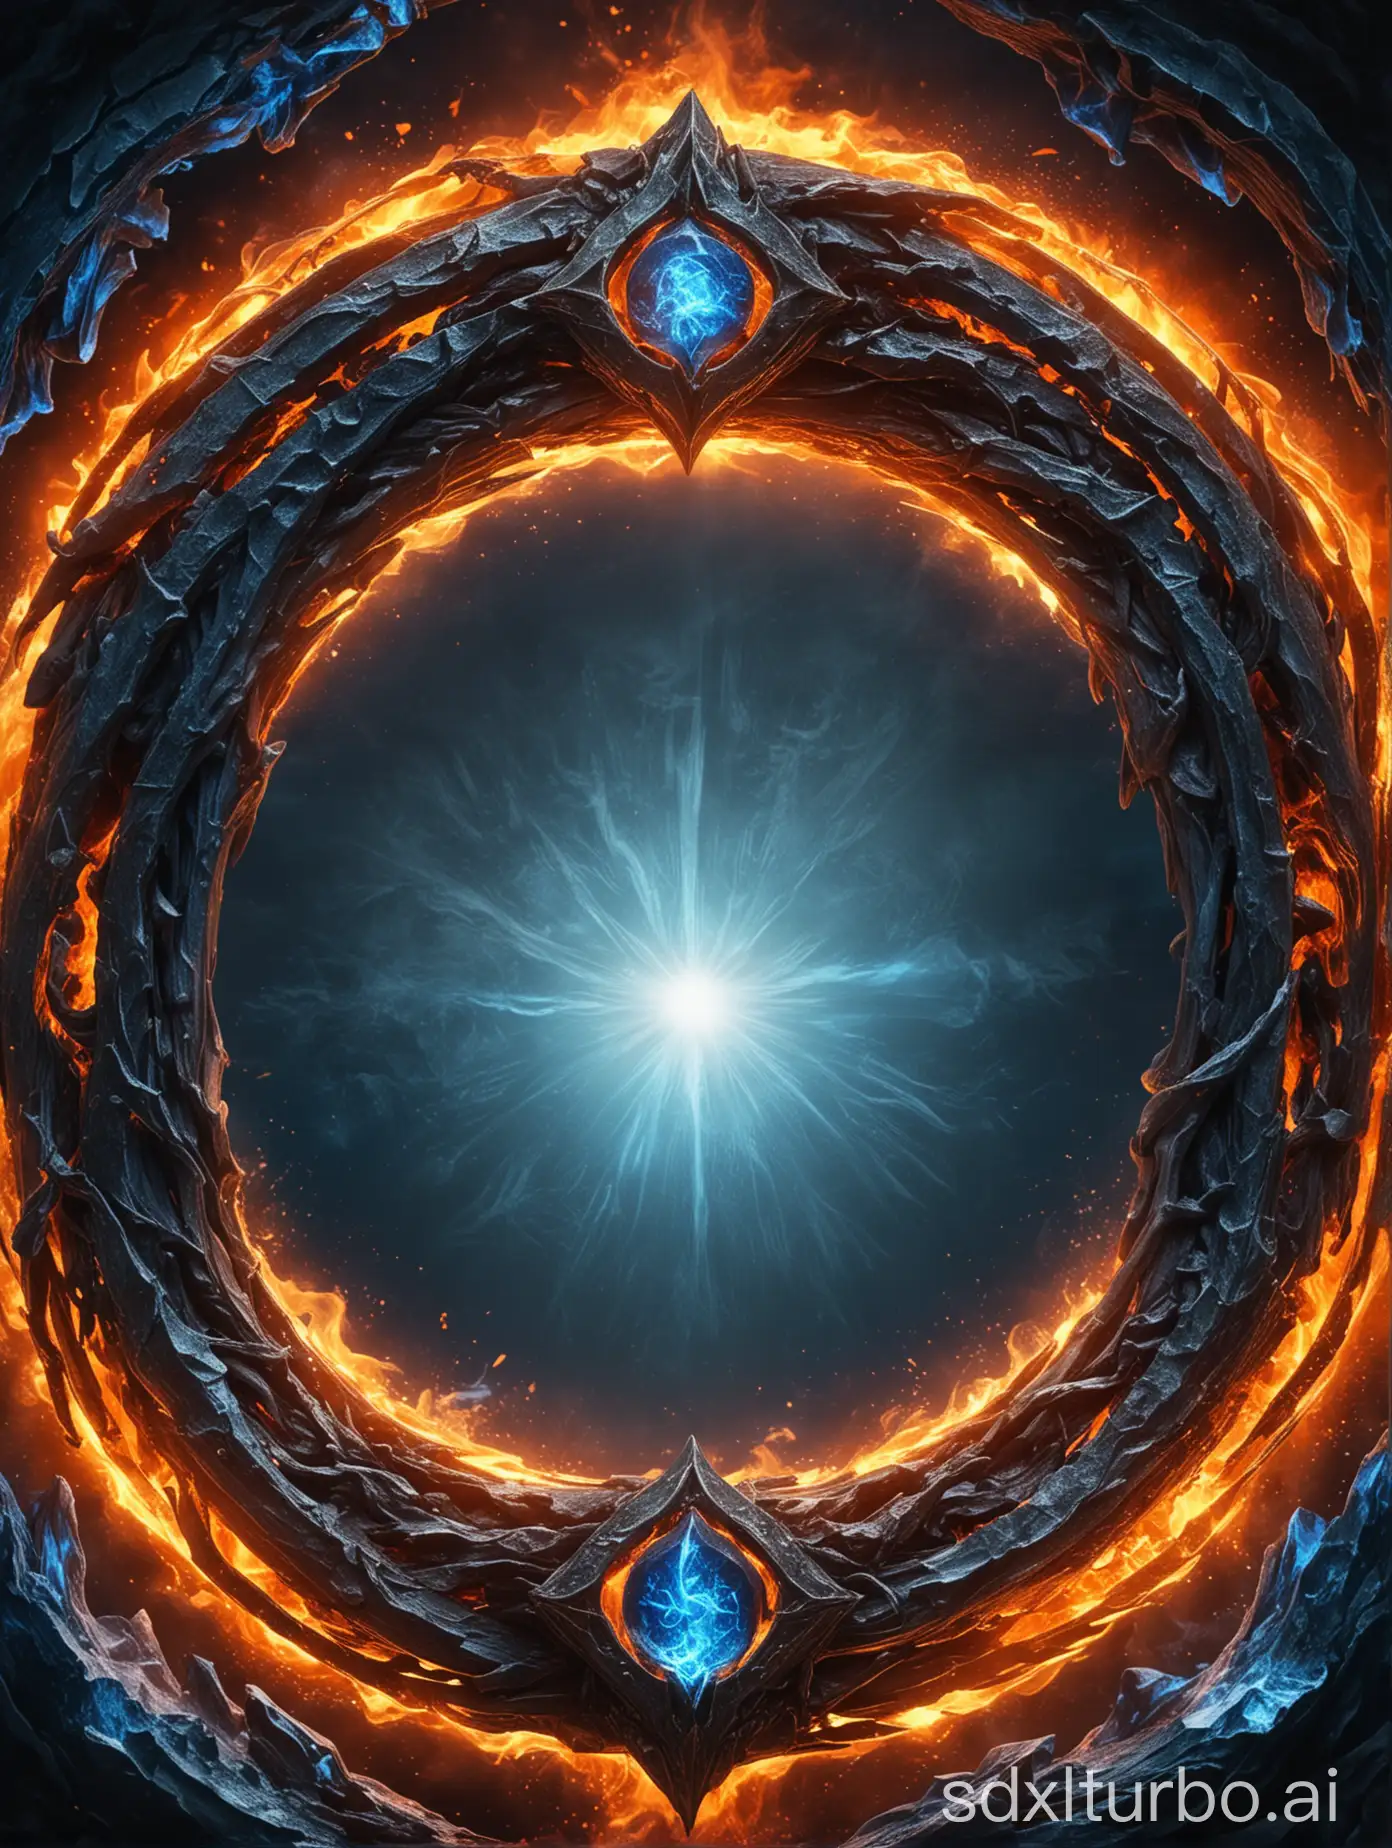 Elden-Ring-Background-Fire-and-Ice-in-Orange-and-Blue